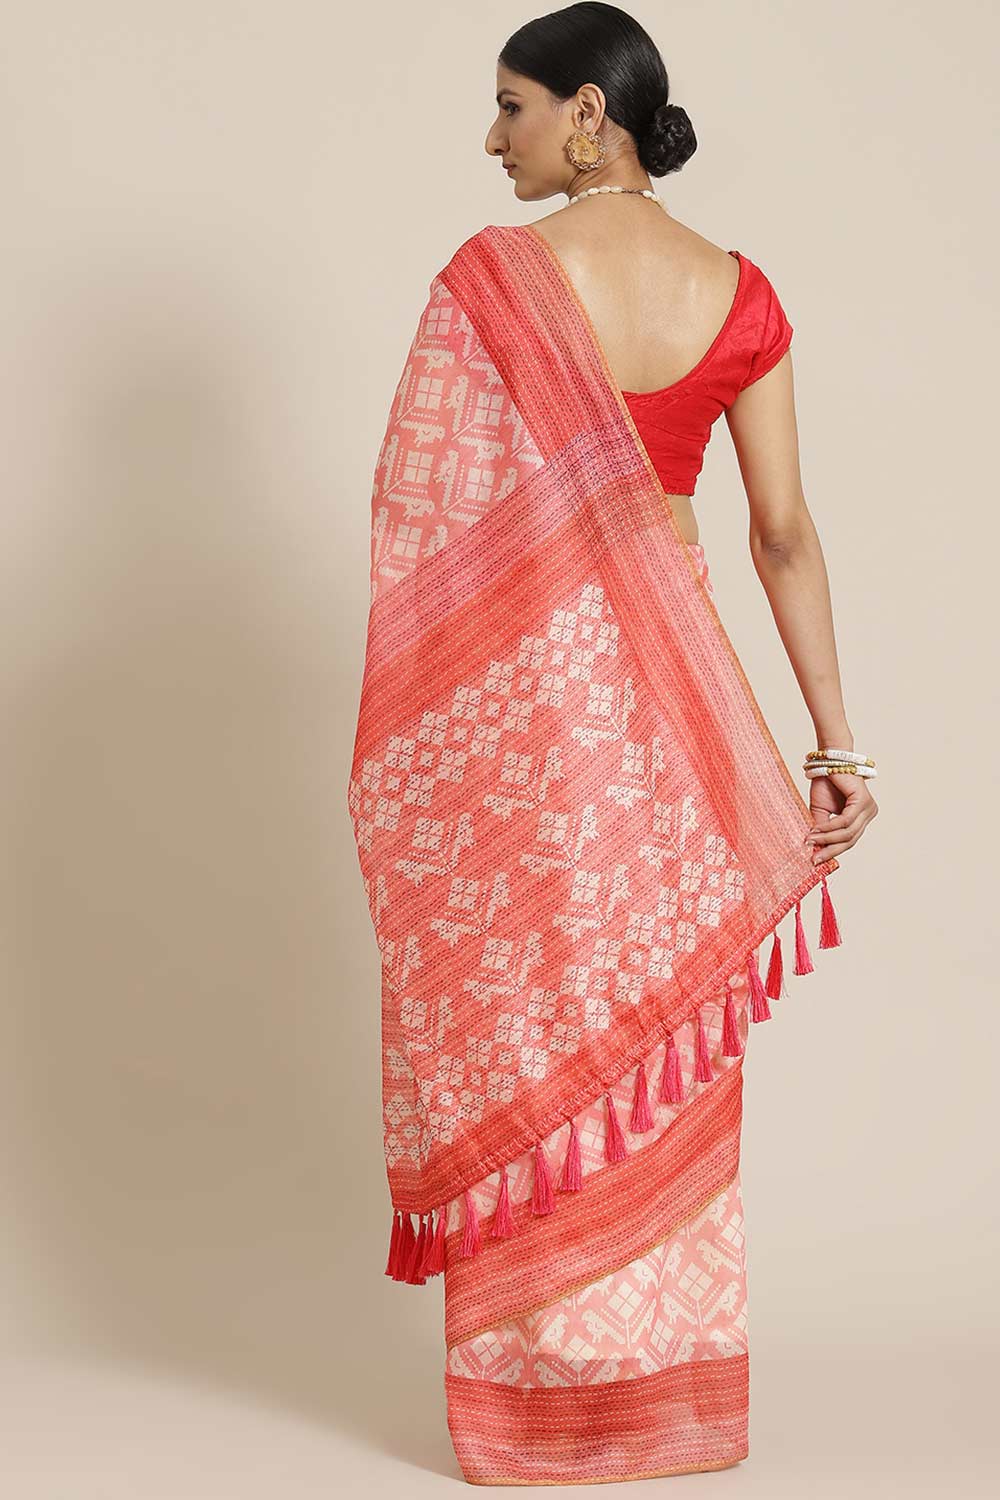 Shop Trina Pink Cotton Block Printed One Minute Saree at best offer at our  Store - One Minute Saree